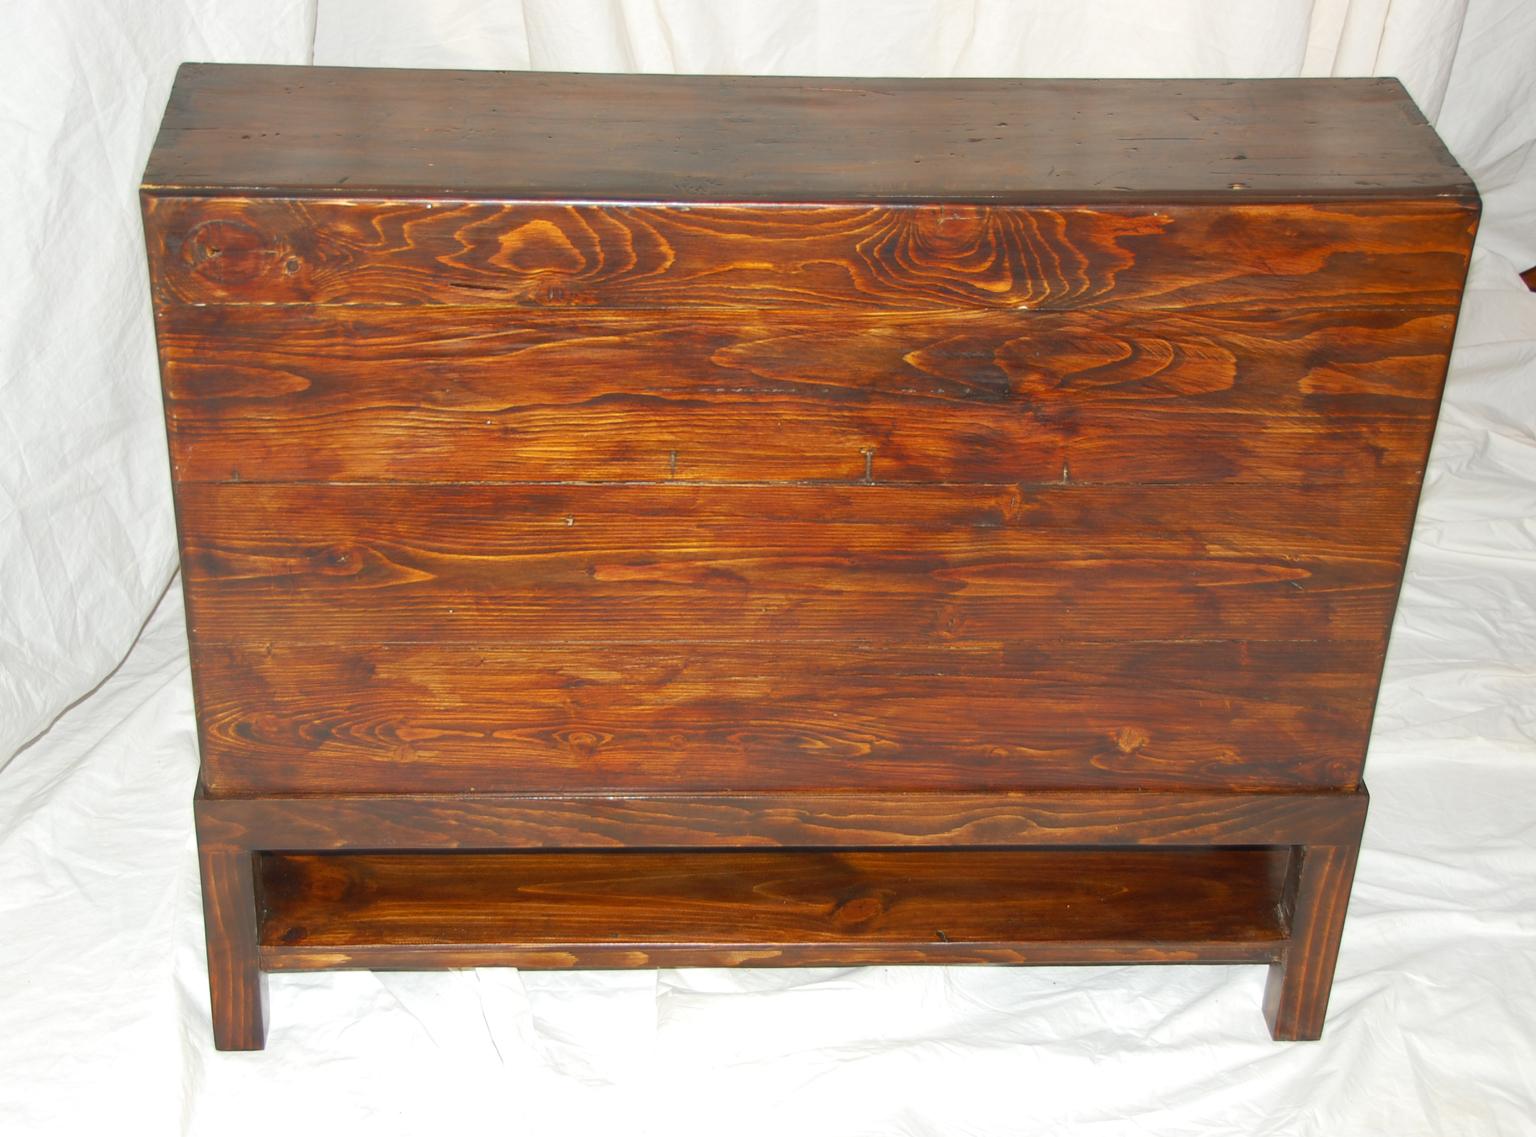 Early Victorian English 19th Century Apothecary Chest in Mahogany and Pine Now on Bespoke Stand For Sale